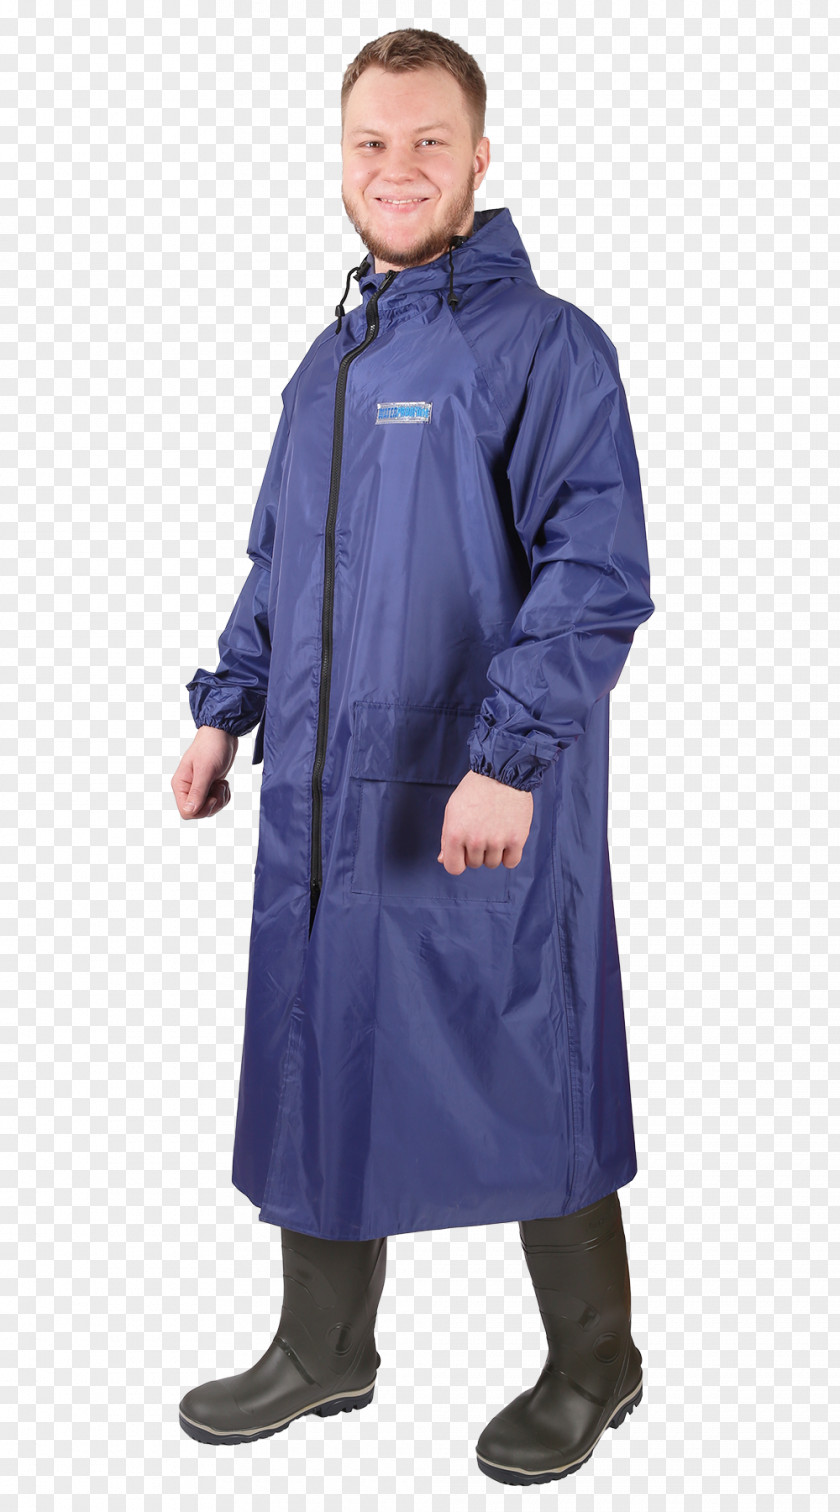 Jacket Raincoat Personal Protective Equipment Workwear Clothing PNG